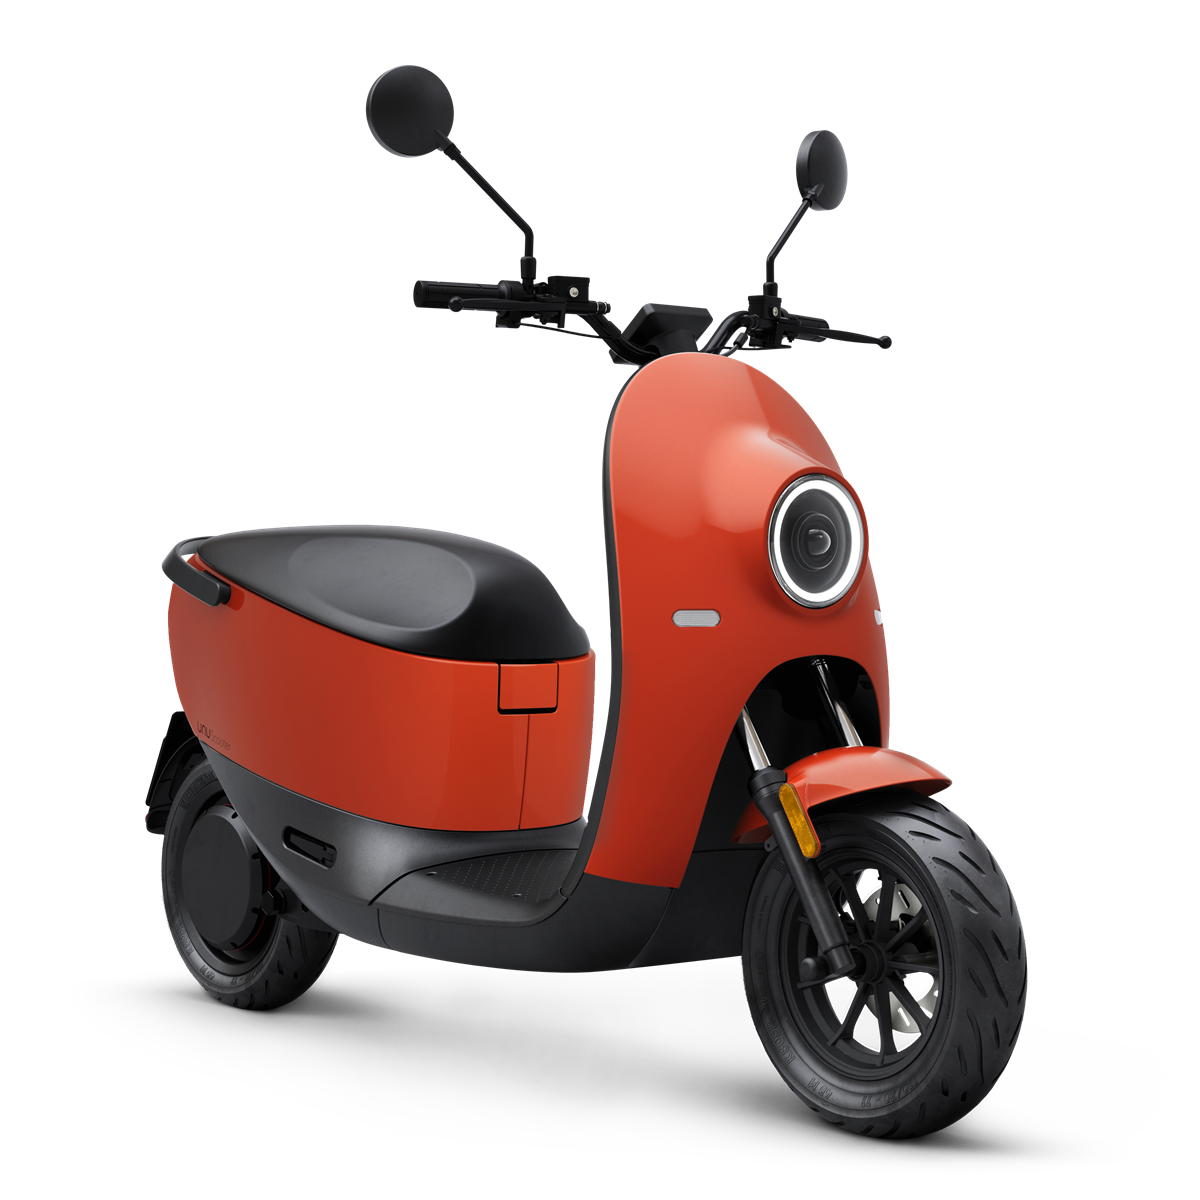 unu Scooter_Red Glossy_ab EUR 3.299